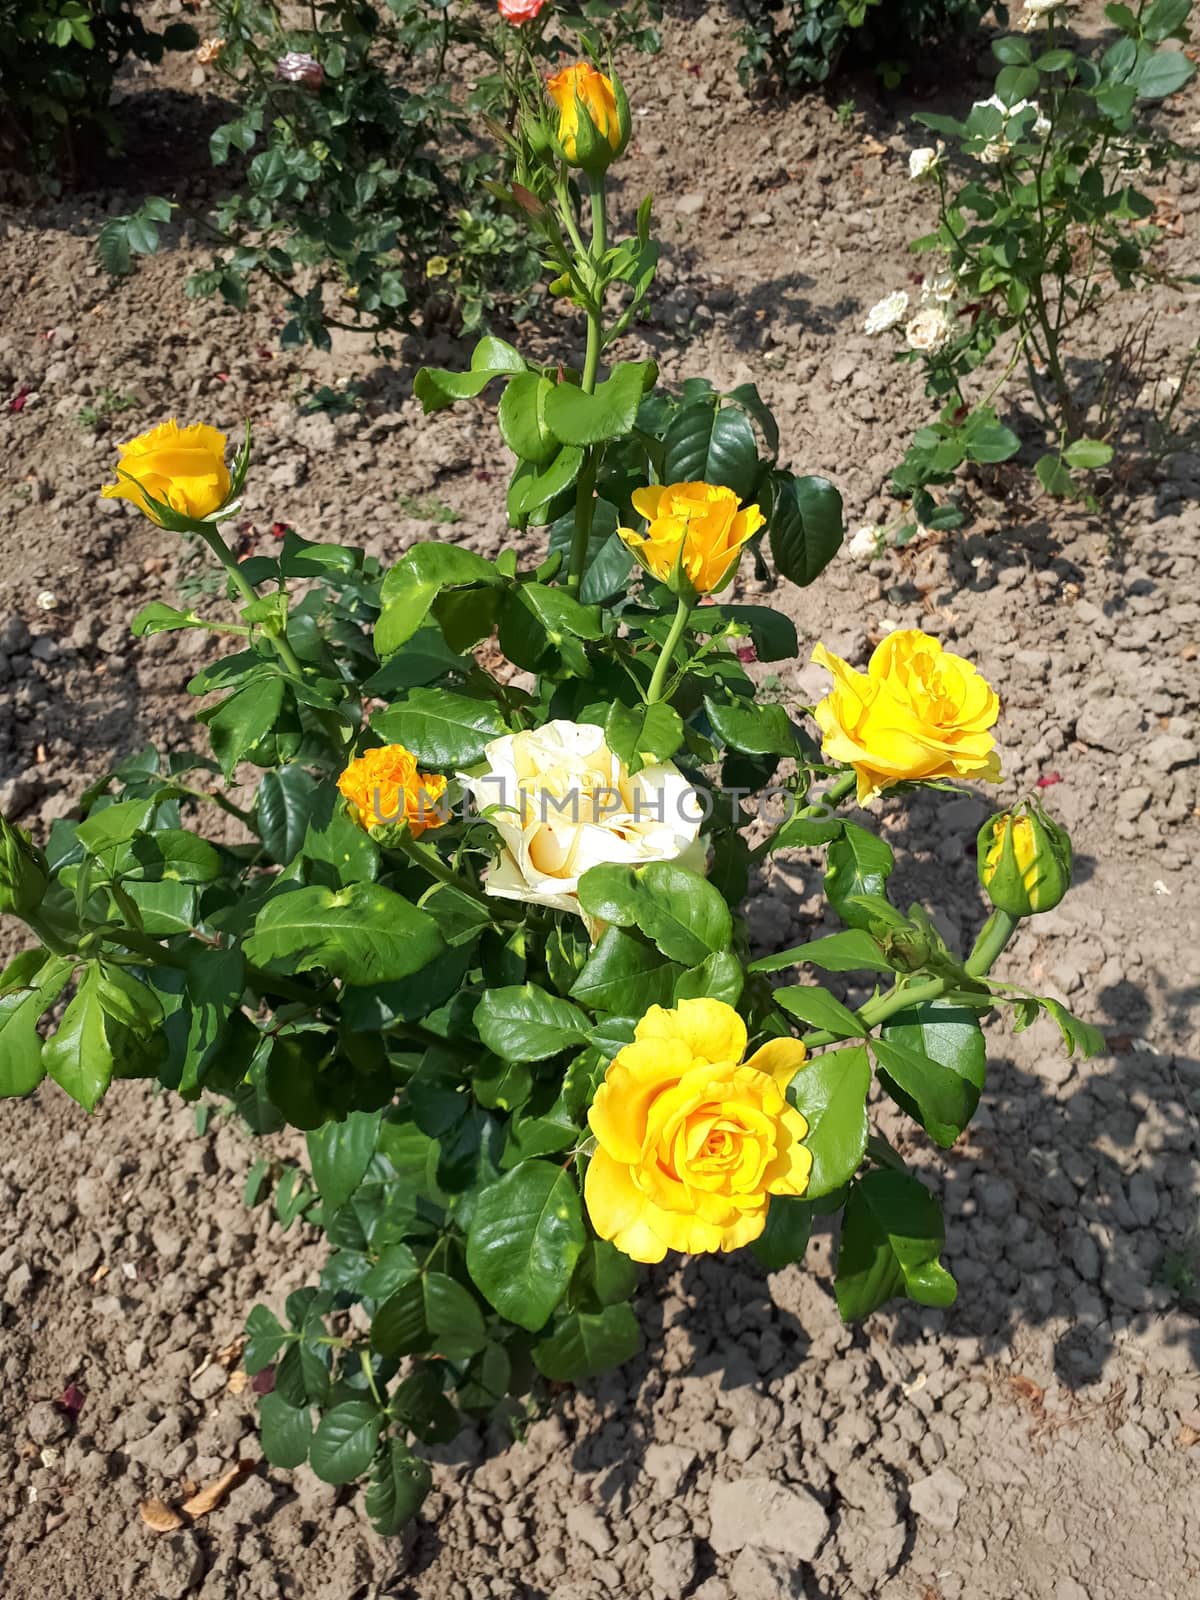 The flowering of yellow roses on the flowerbed. Yellow roses.